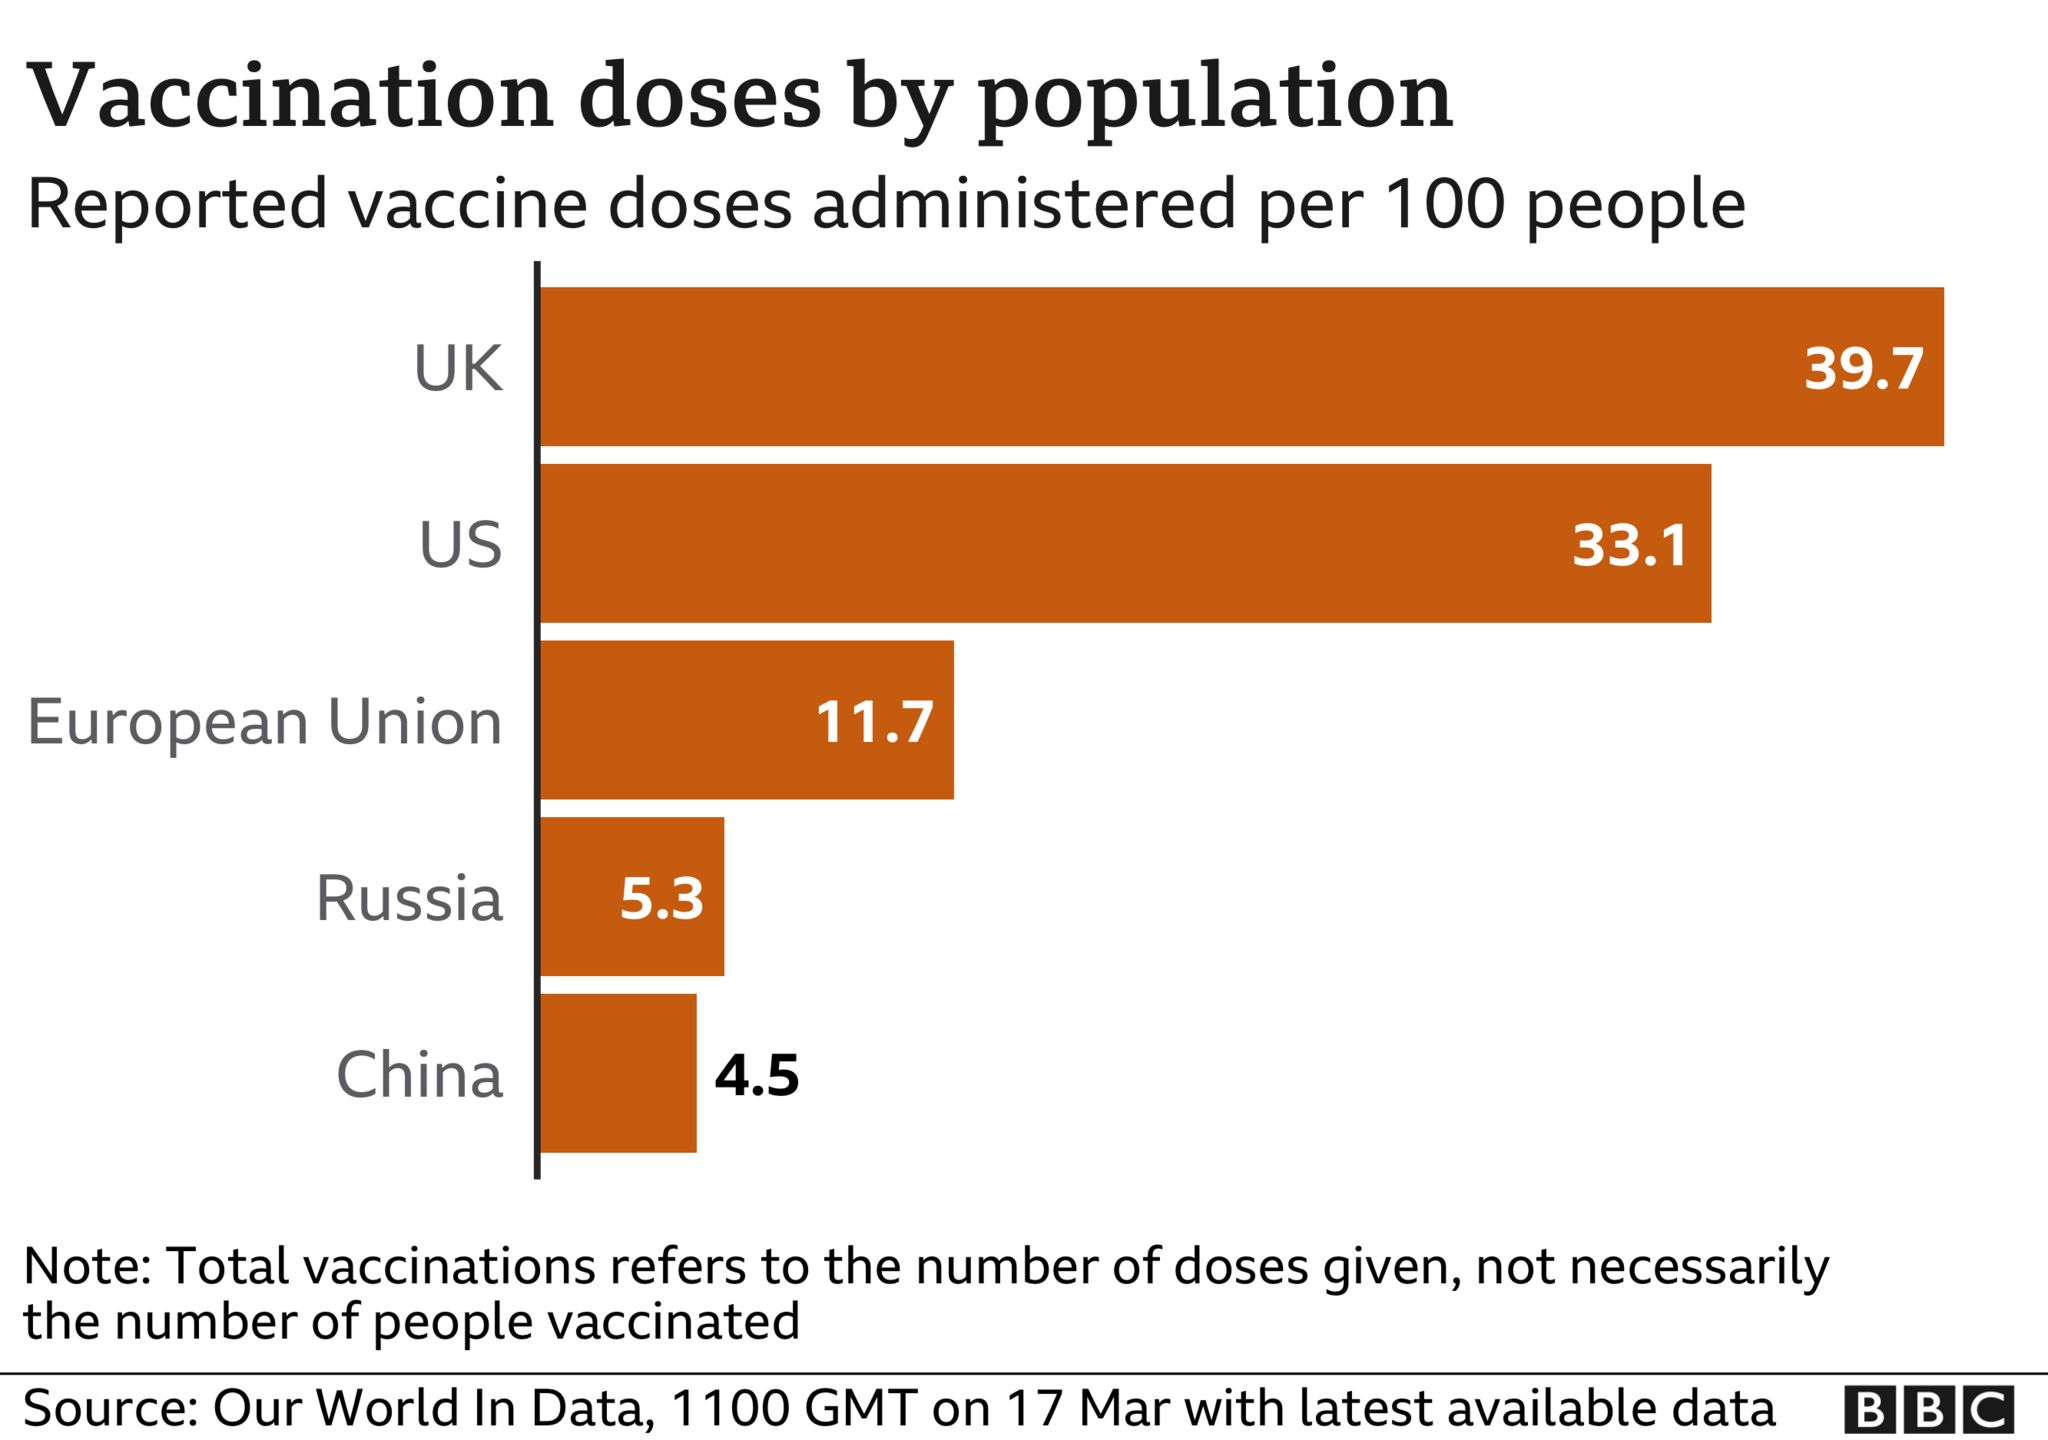 Chart showing number of doses administered in the UK, US, EU, Russia and China